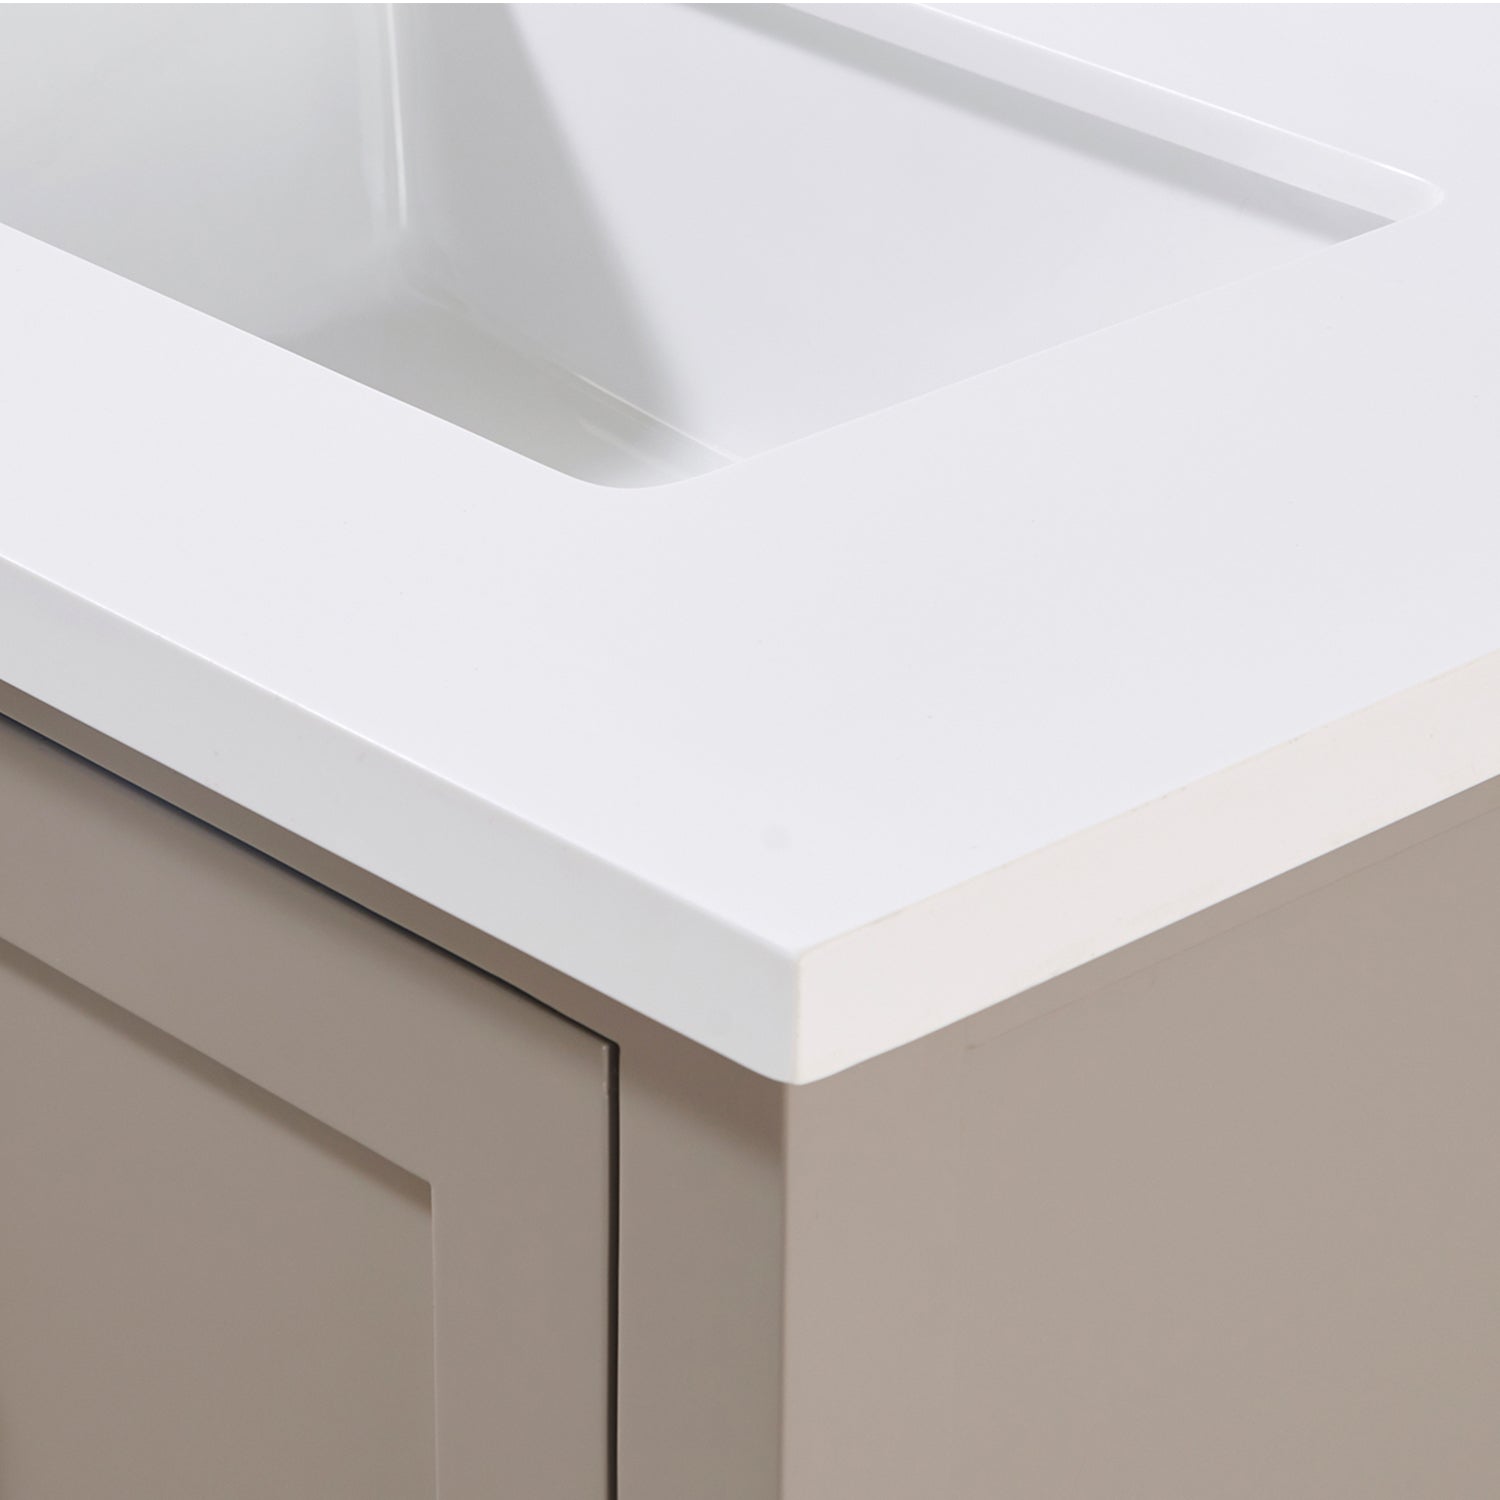 Caorle Stone effects Single Sink Vanity Top in Snow White with White Sink